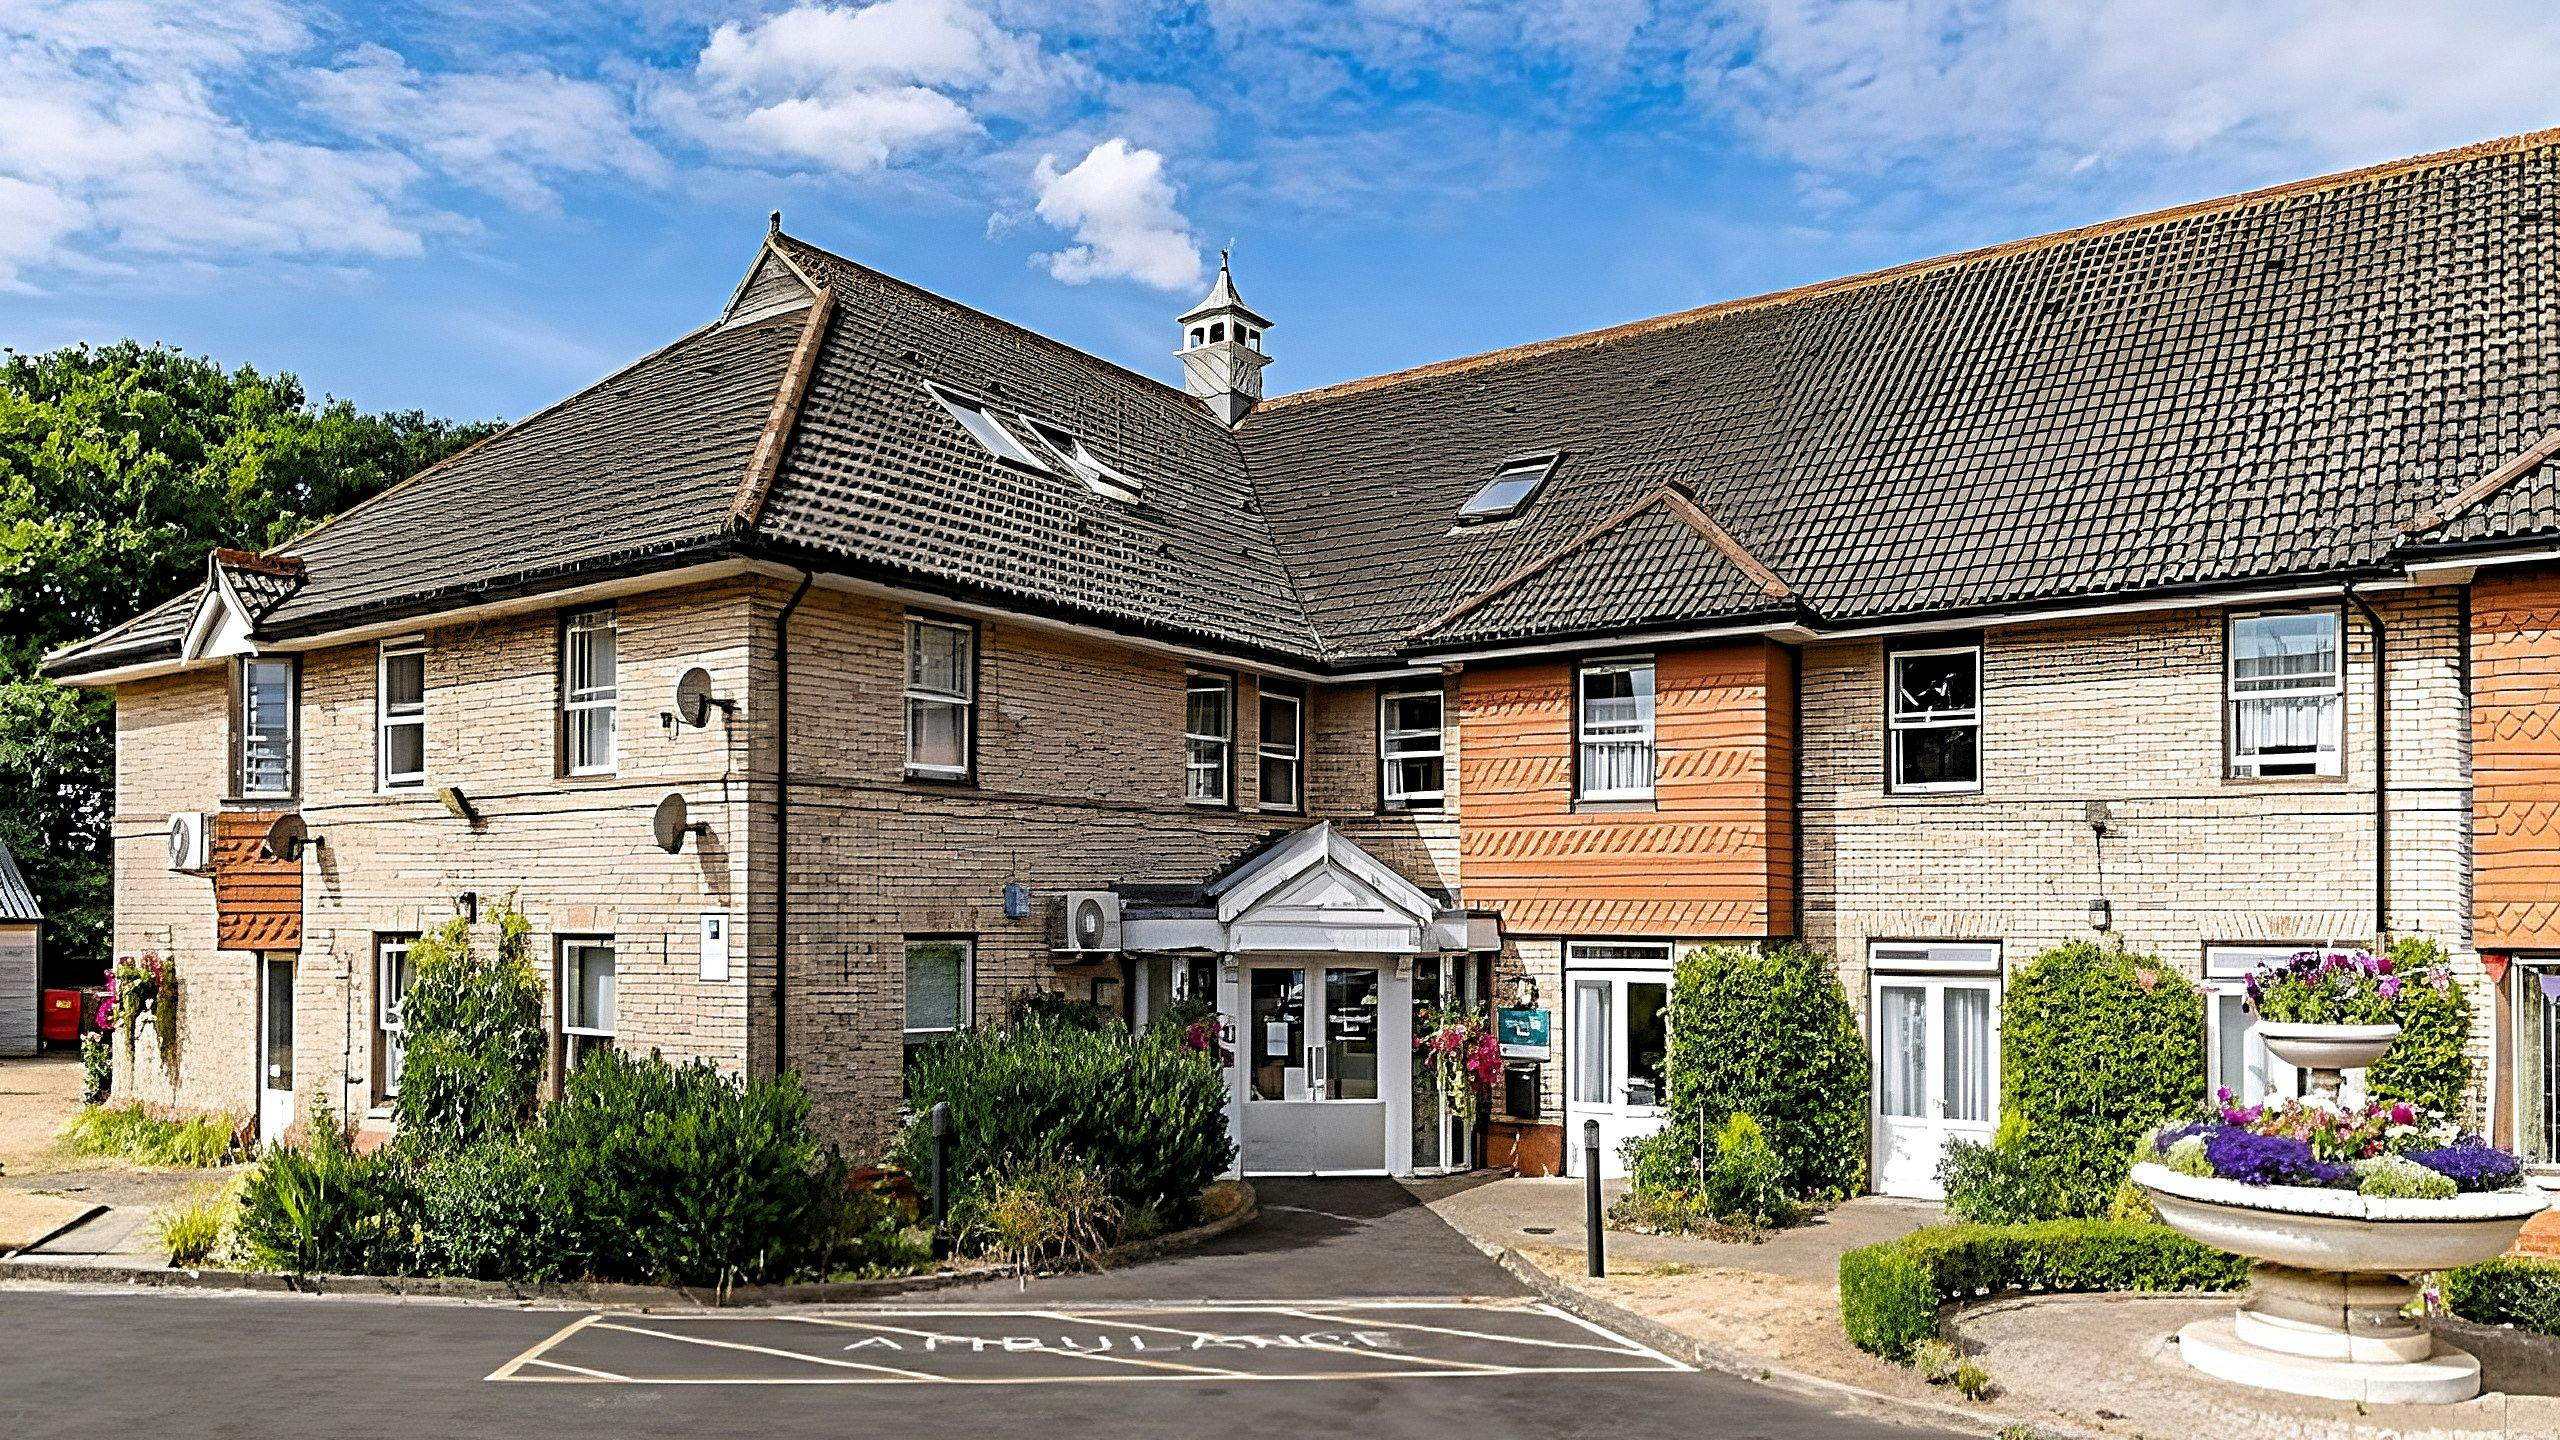 Countrywide - Dussindale Park care home 8